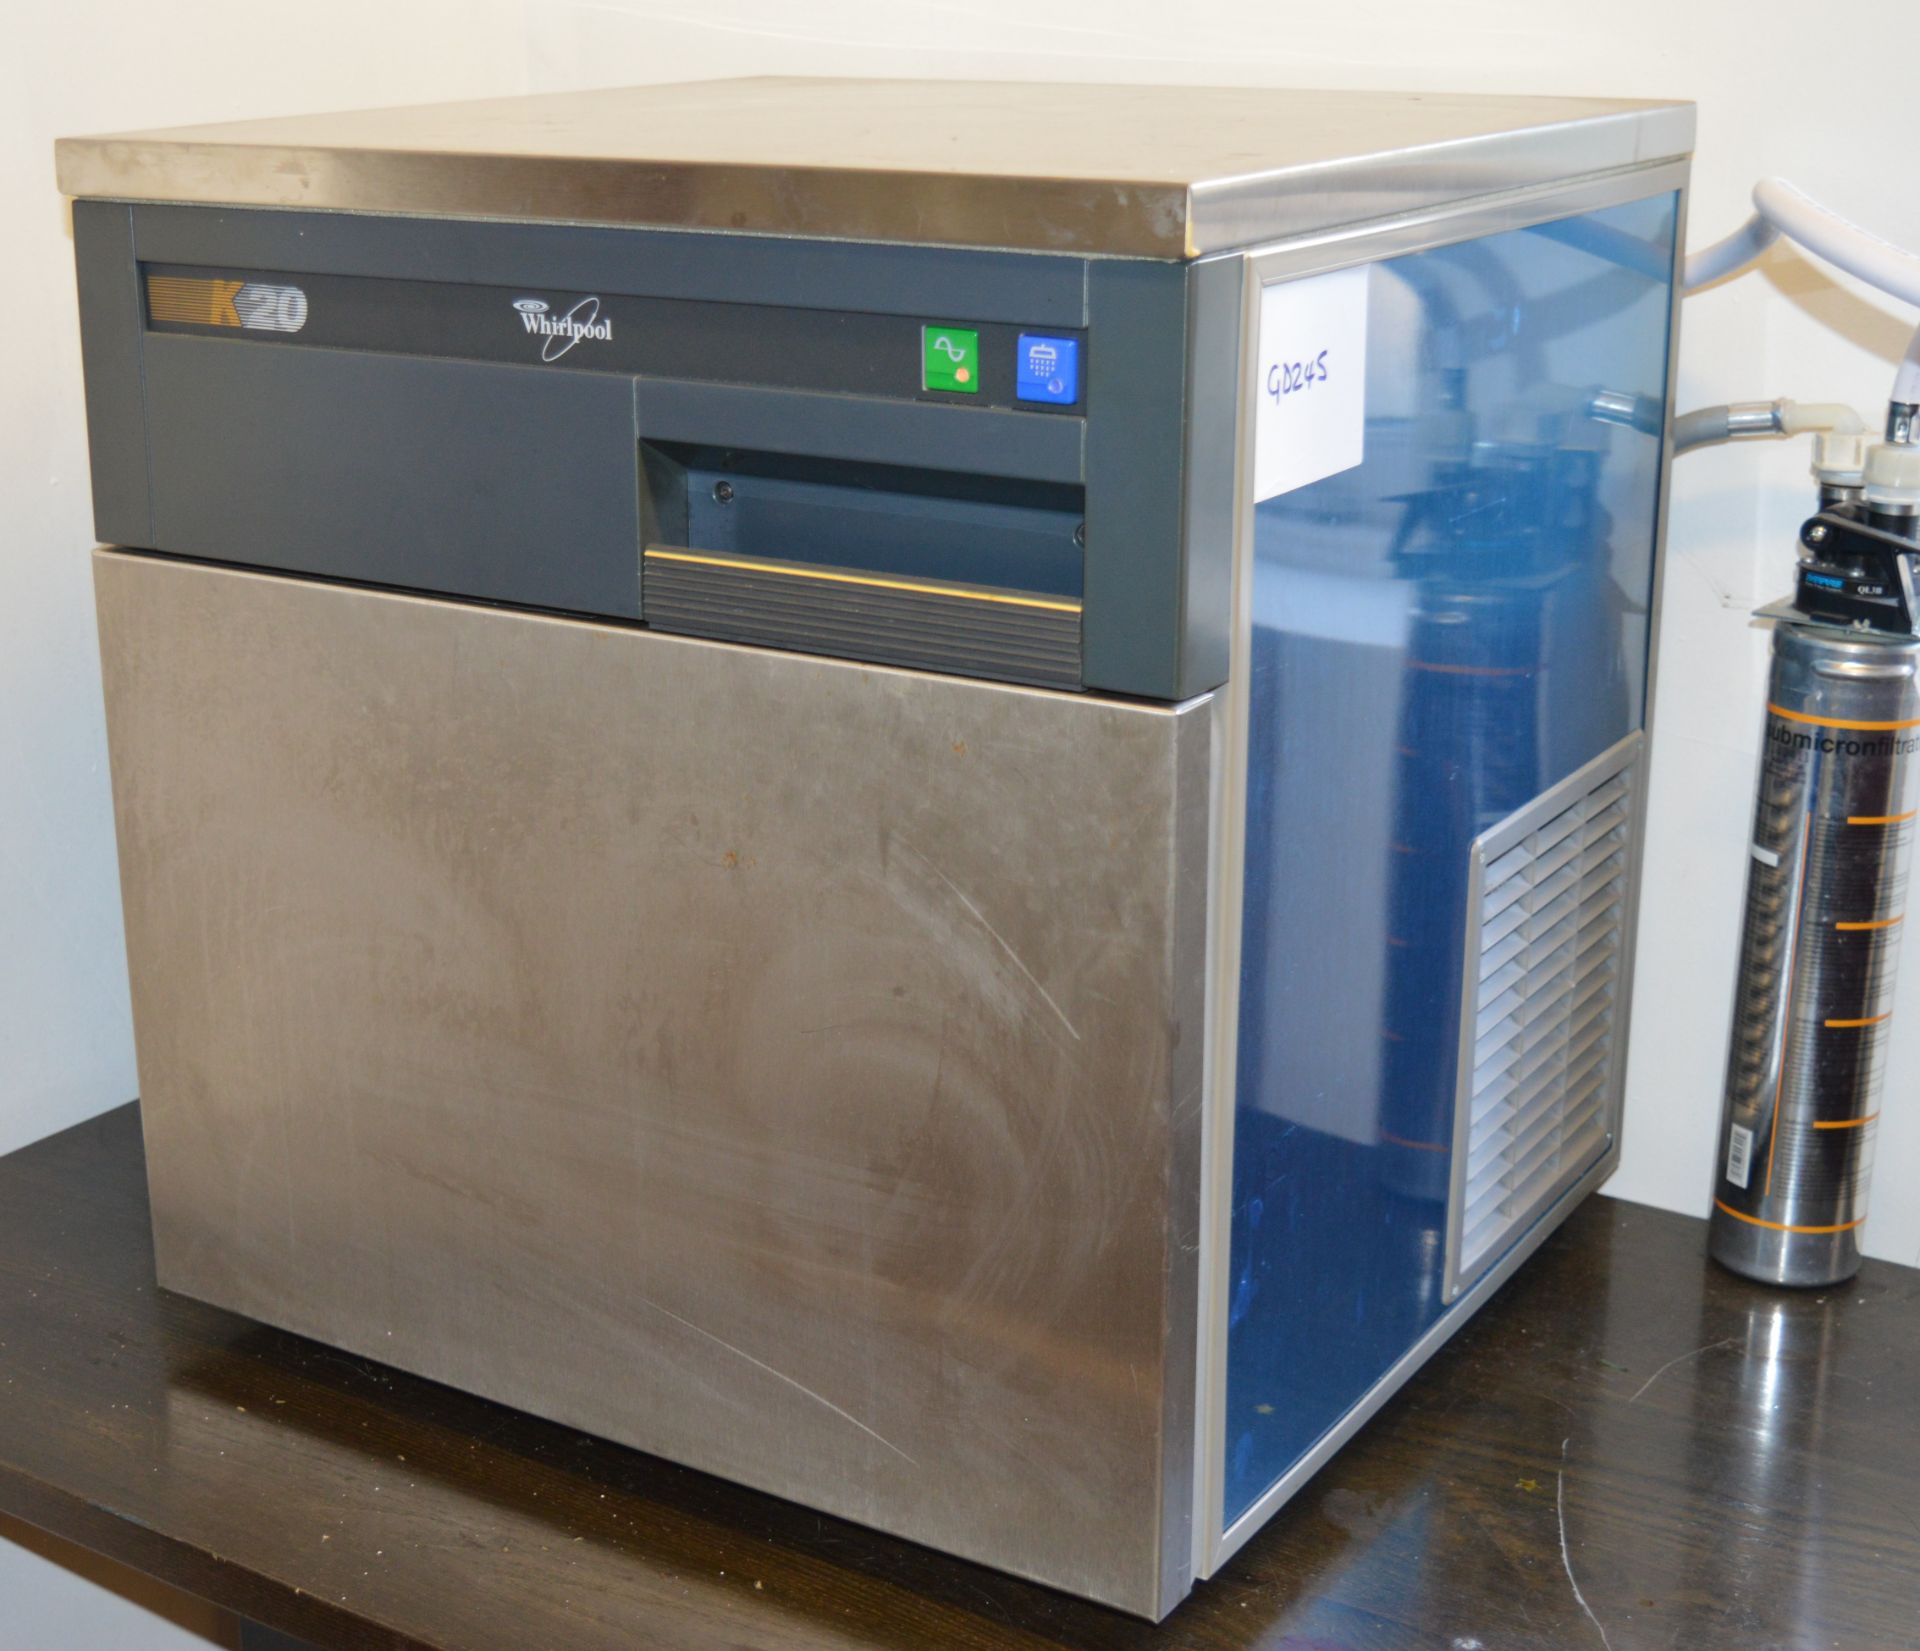 1 x Whirlpool K20 Counter Top Icer Maker 24kg / 24hr Production Rate - Automatic Operation - - Image 2 of 5